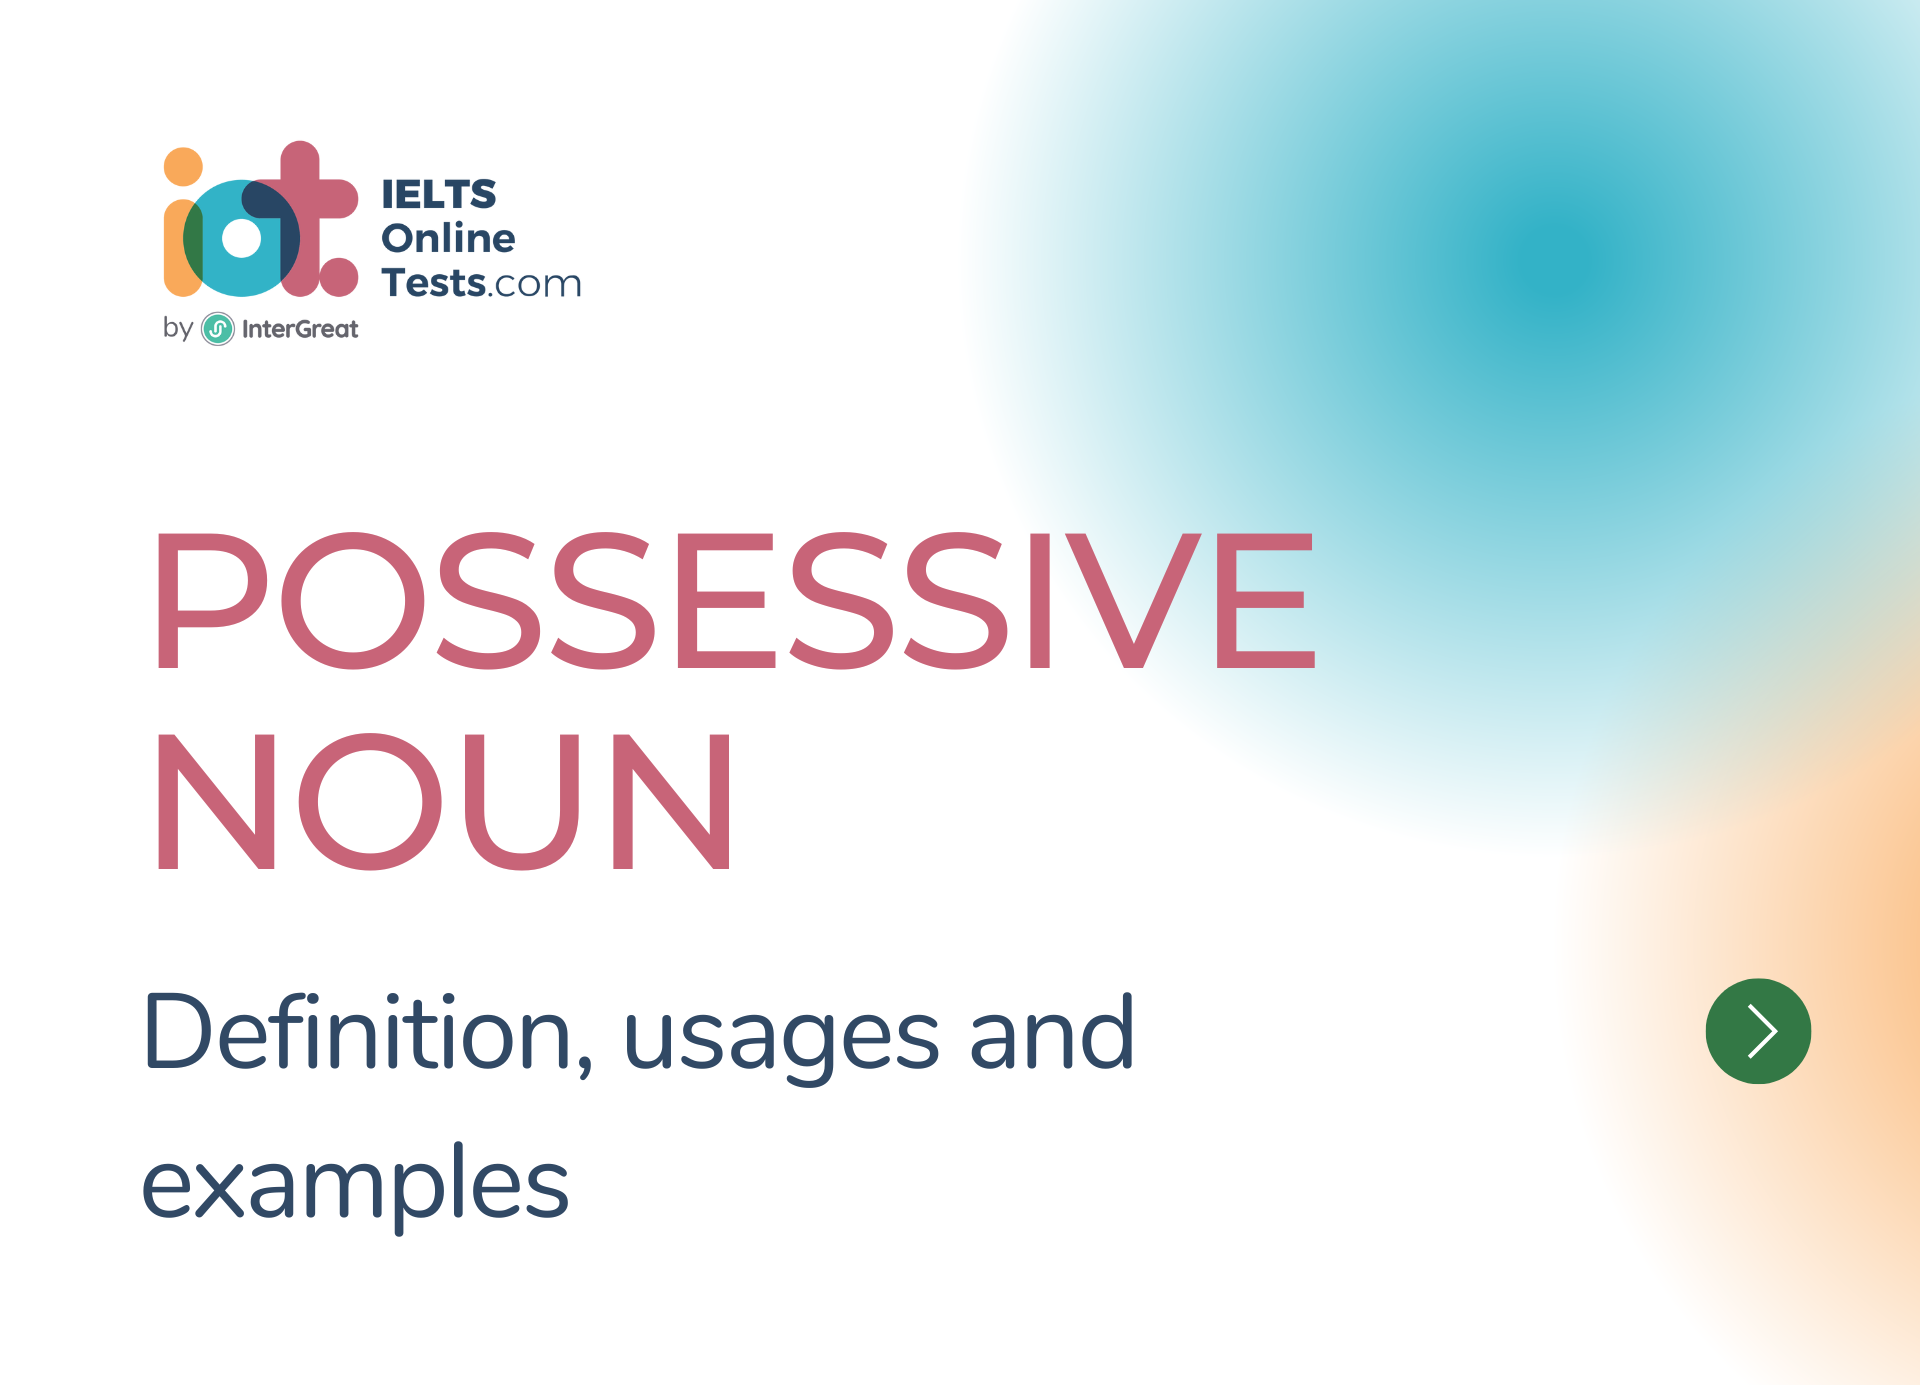 Possessive noun definition and examples